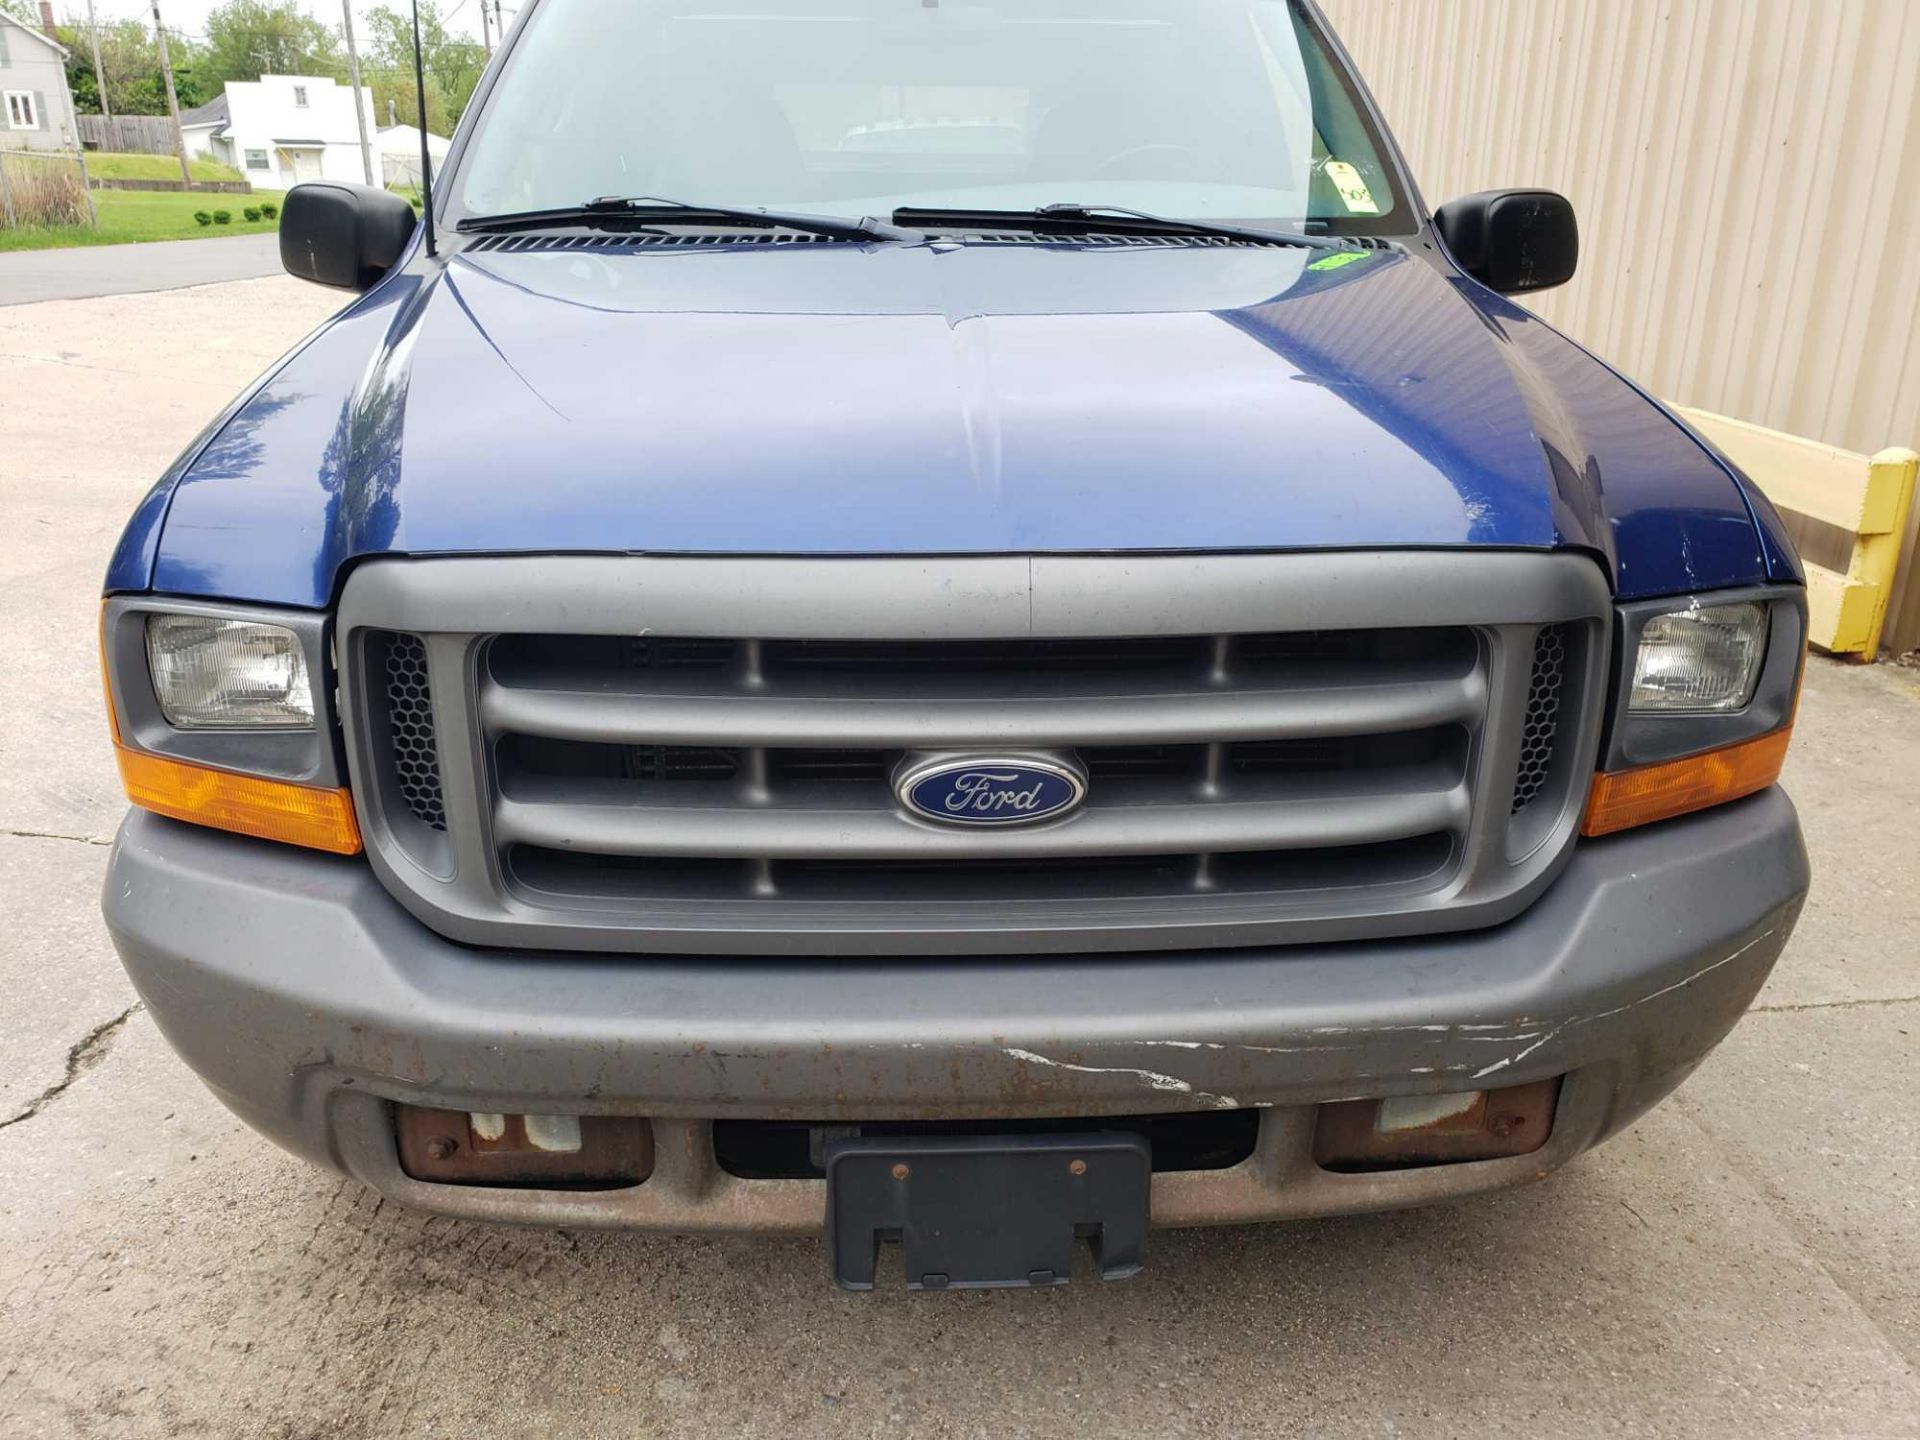 1999 Ford F250 truck. VIN 1FTNF20L6XEA91721. 2wd. 146,657 miles showing on odometer. Municipally own - Image 3 of 19